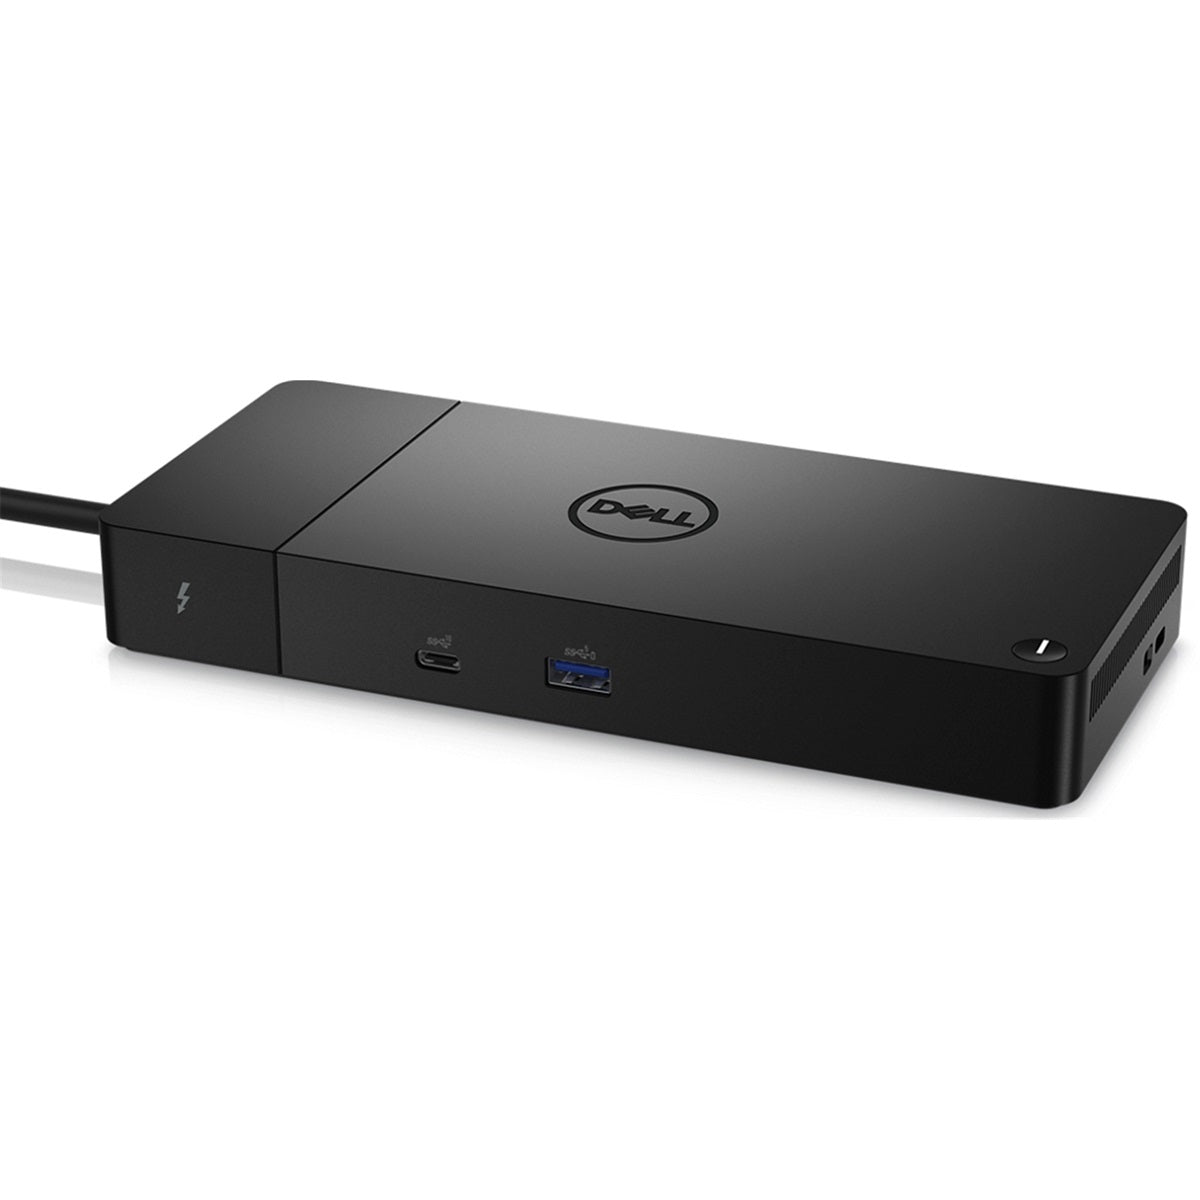 Brand New Dell Thunderbolt Dock WD22TB4 Quad 4K Docking Station 130W power delivery (Up to 90W to non-Dell system) – 3 Year Dell Warranty